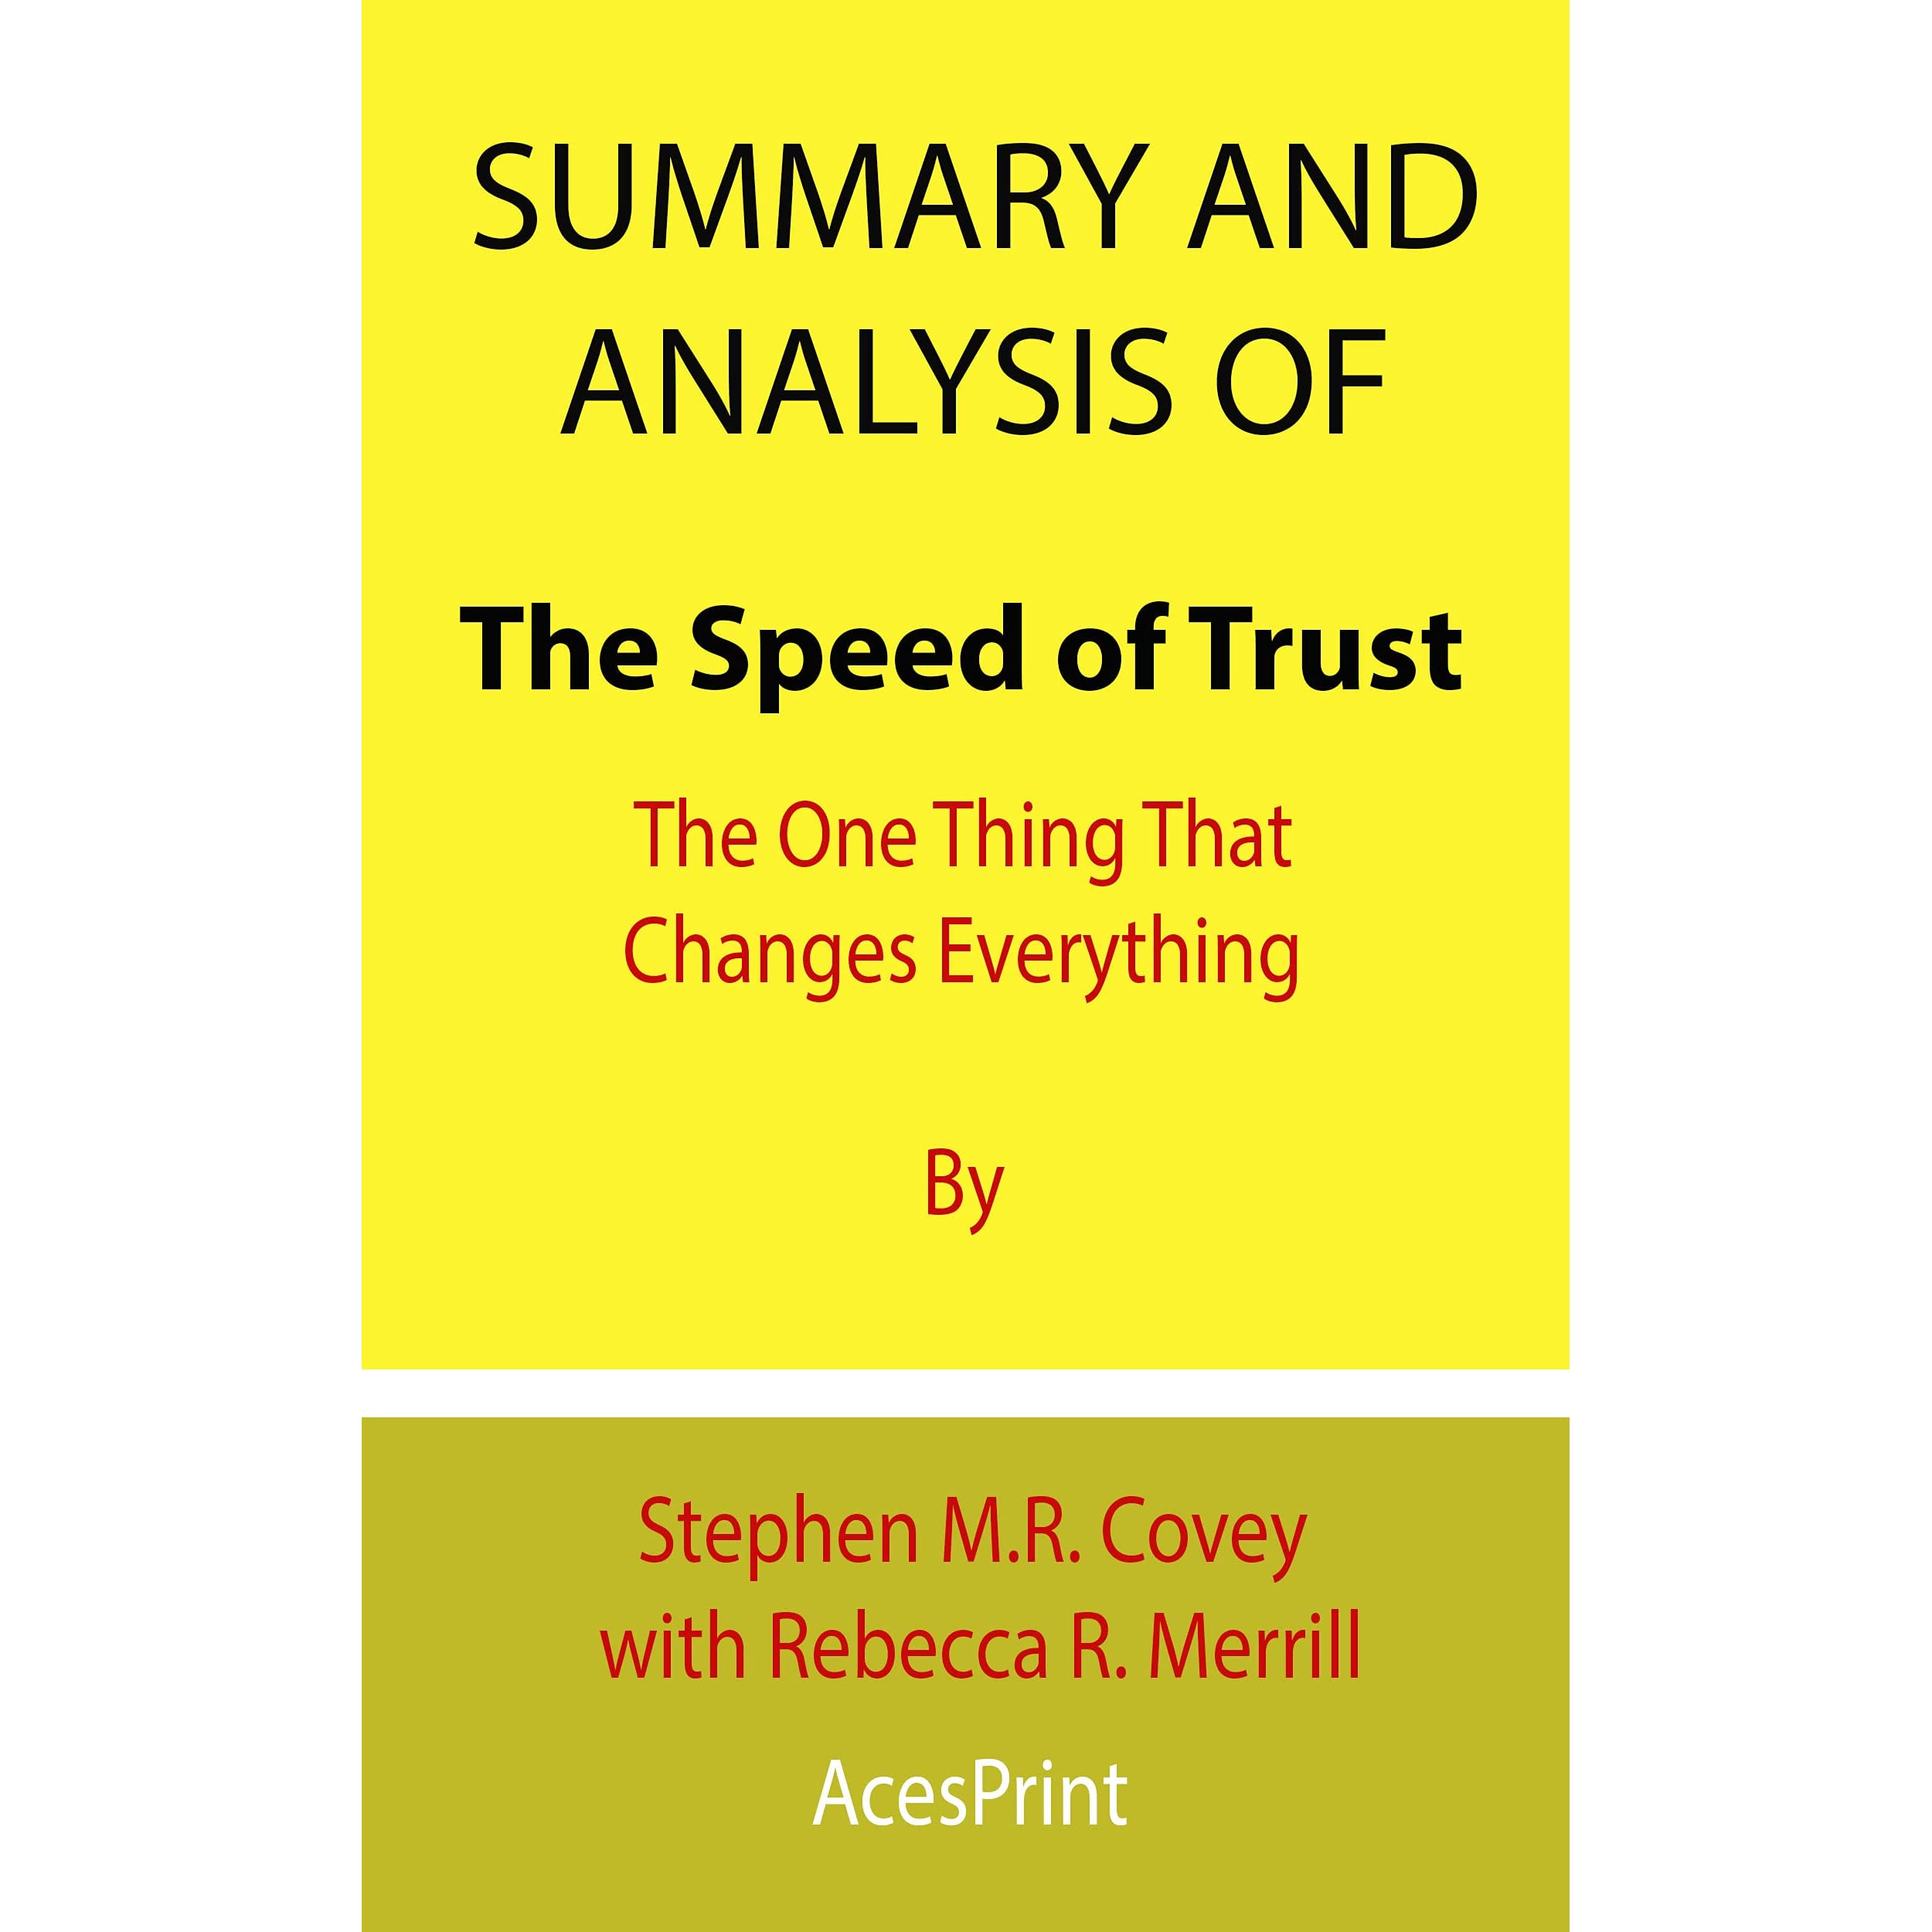 The Speed of Trust - Stephen M.R. Covey with Rebecca R. Merrill